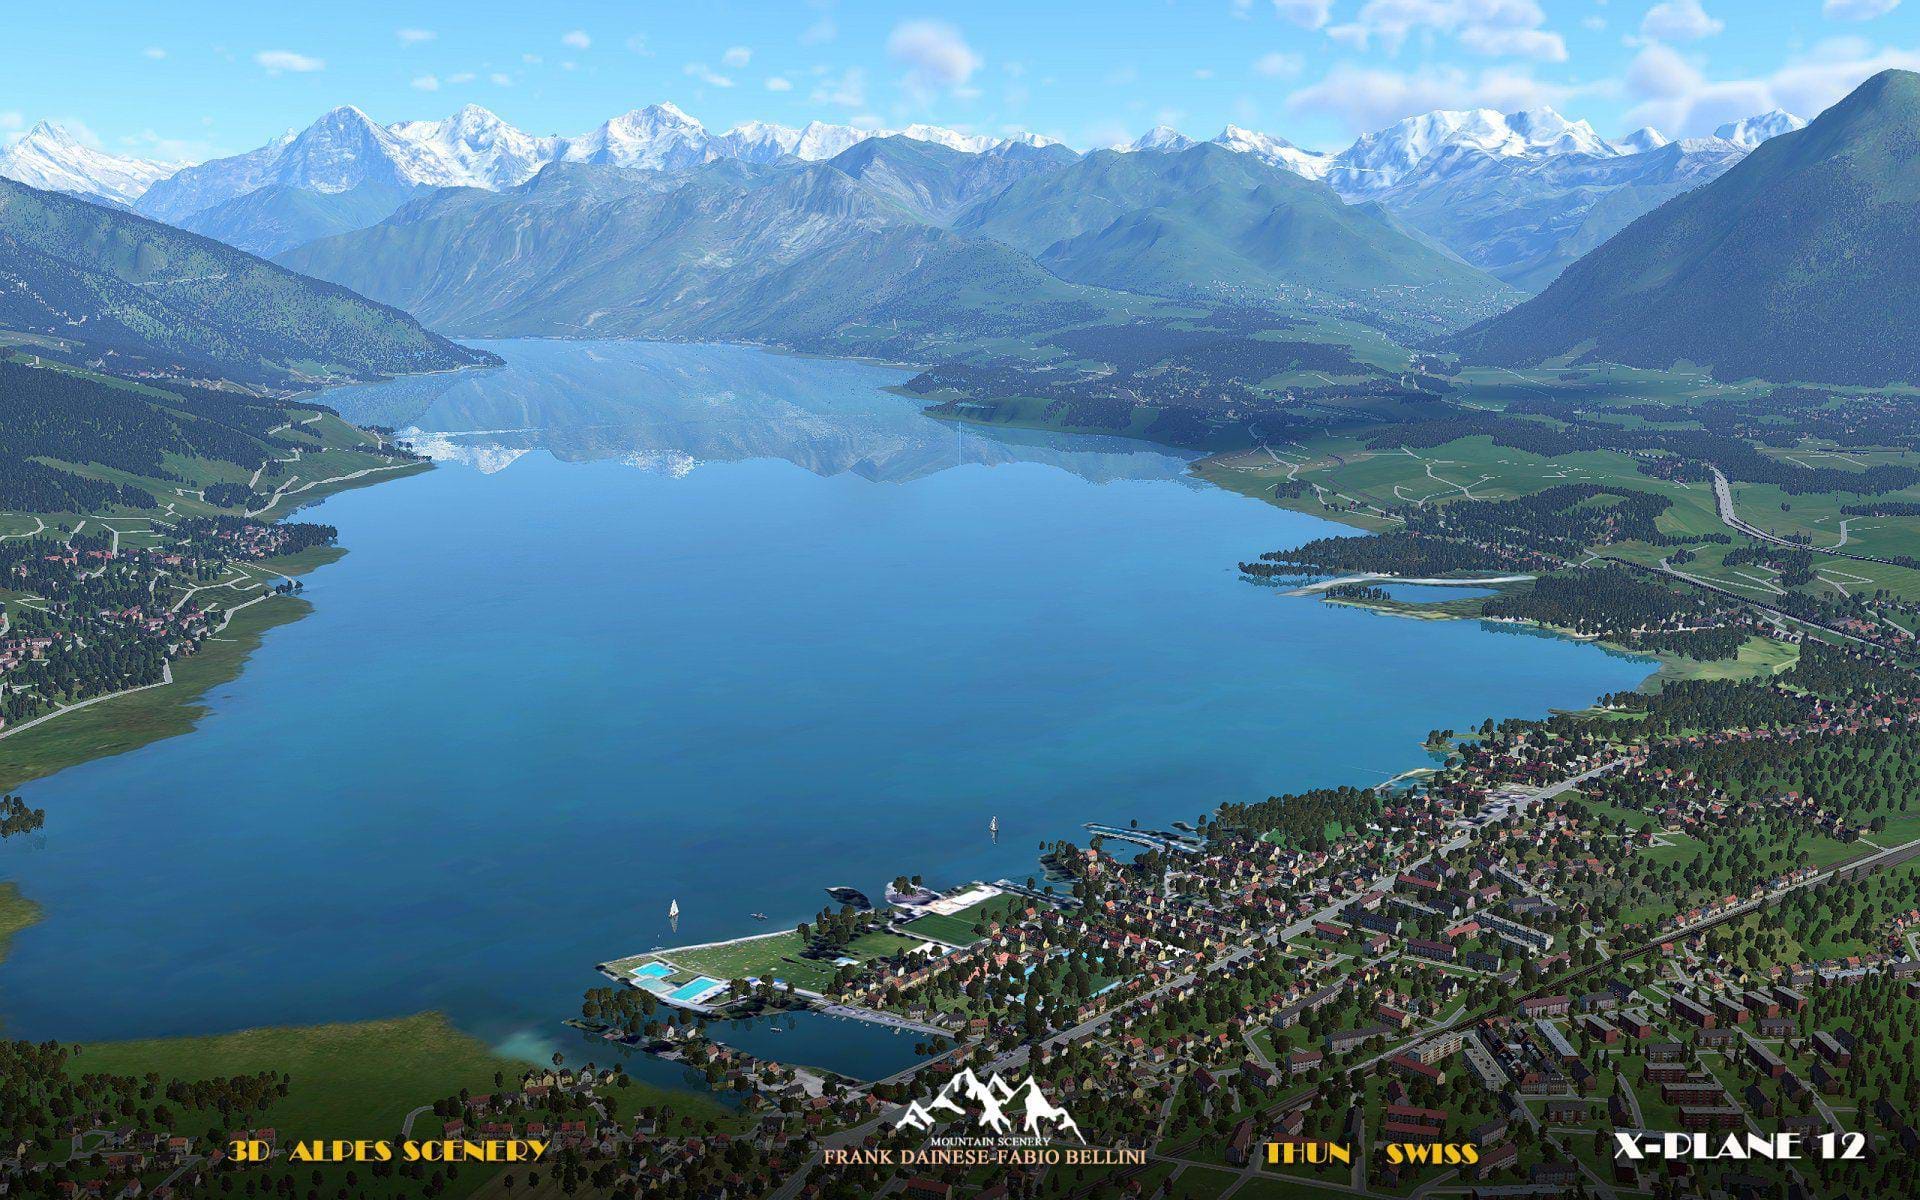 Frank Dainese and Fabio Bellini announced 3D Alps scenery for X-Plane 12